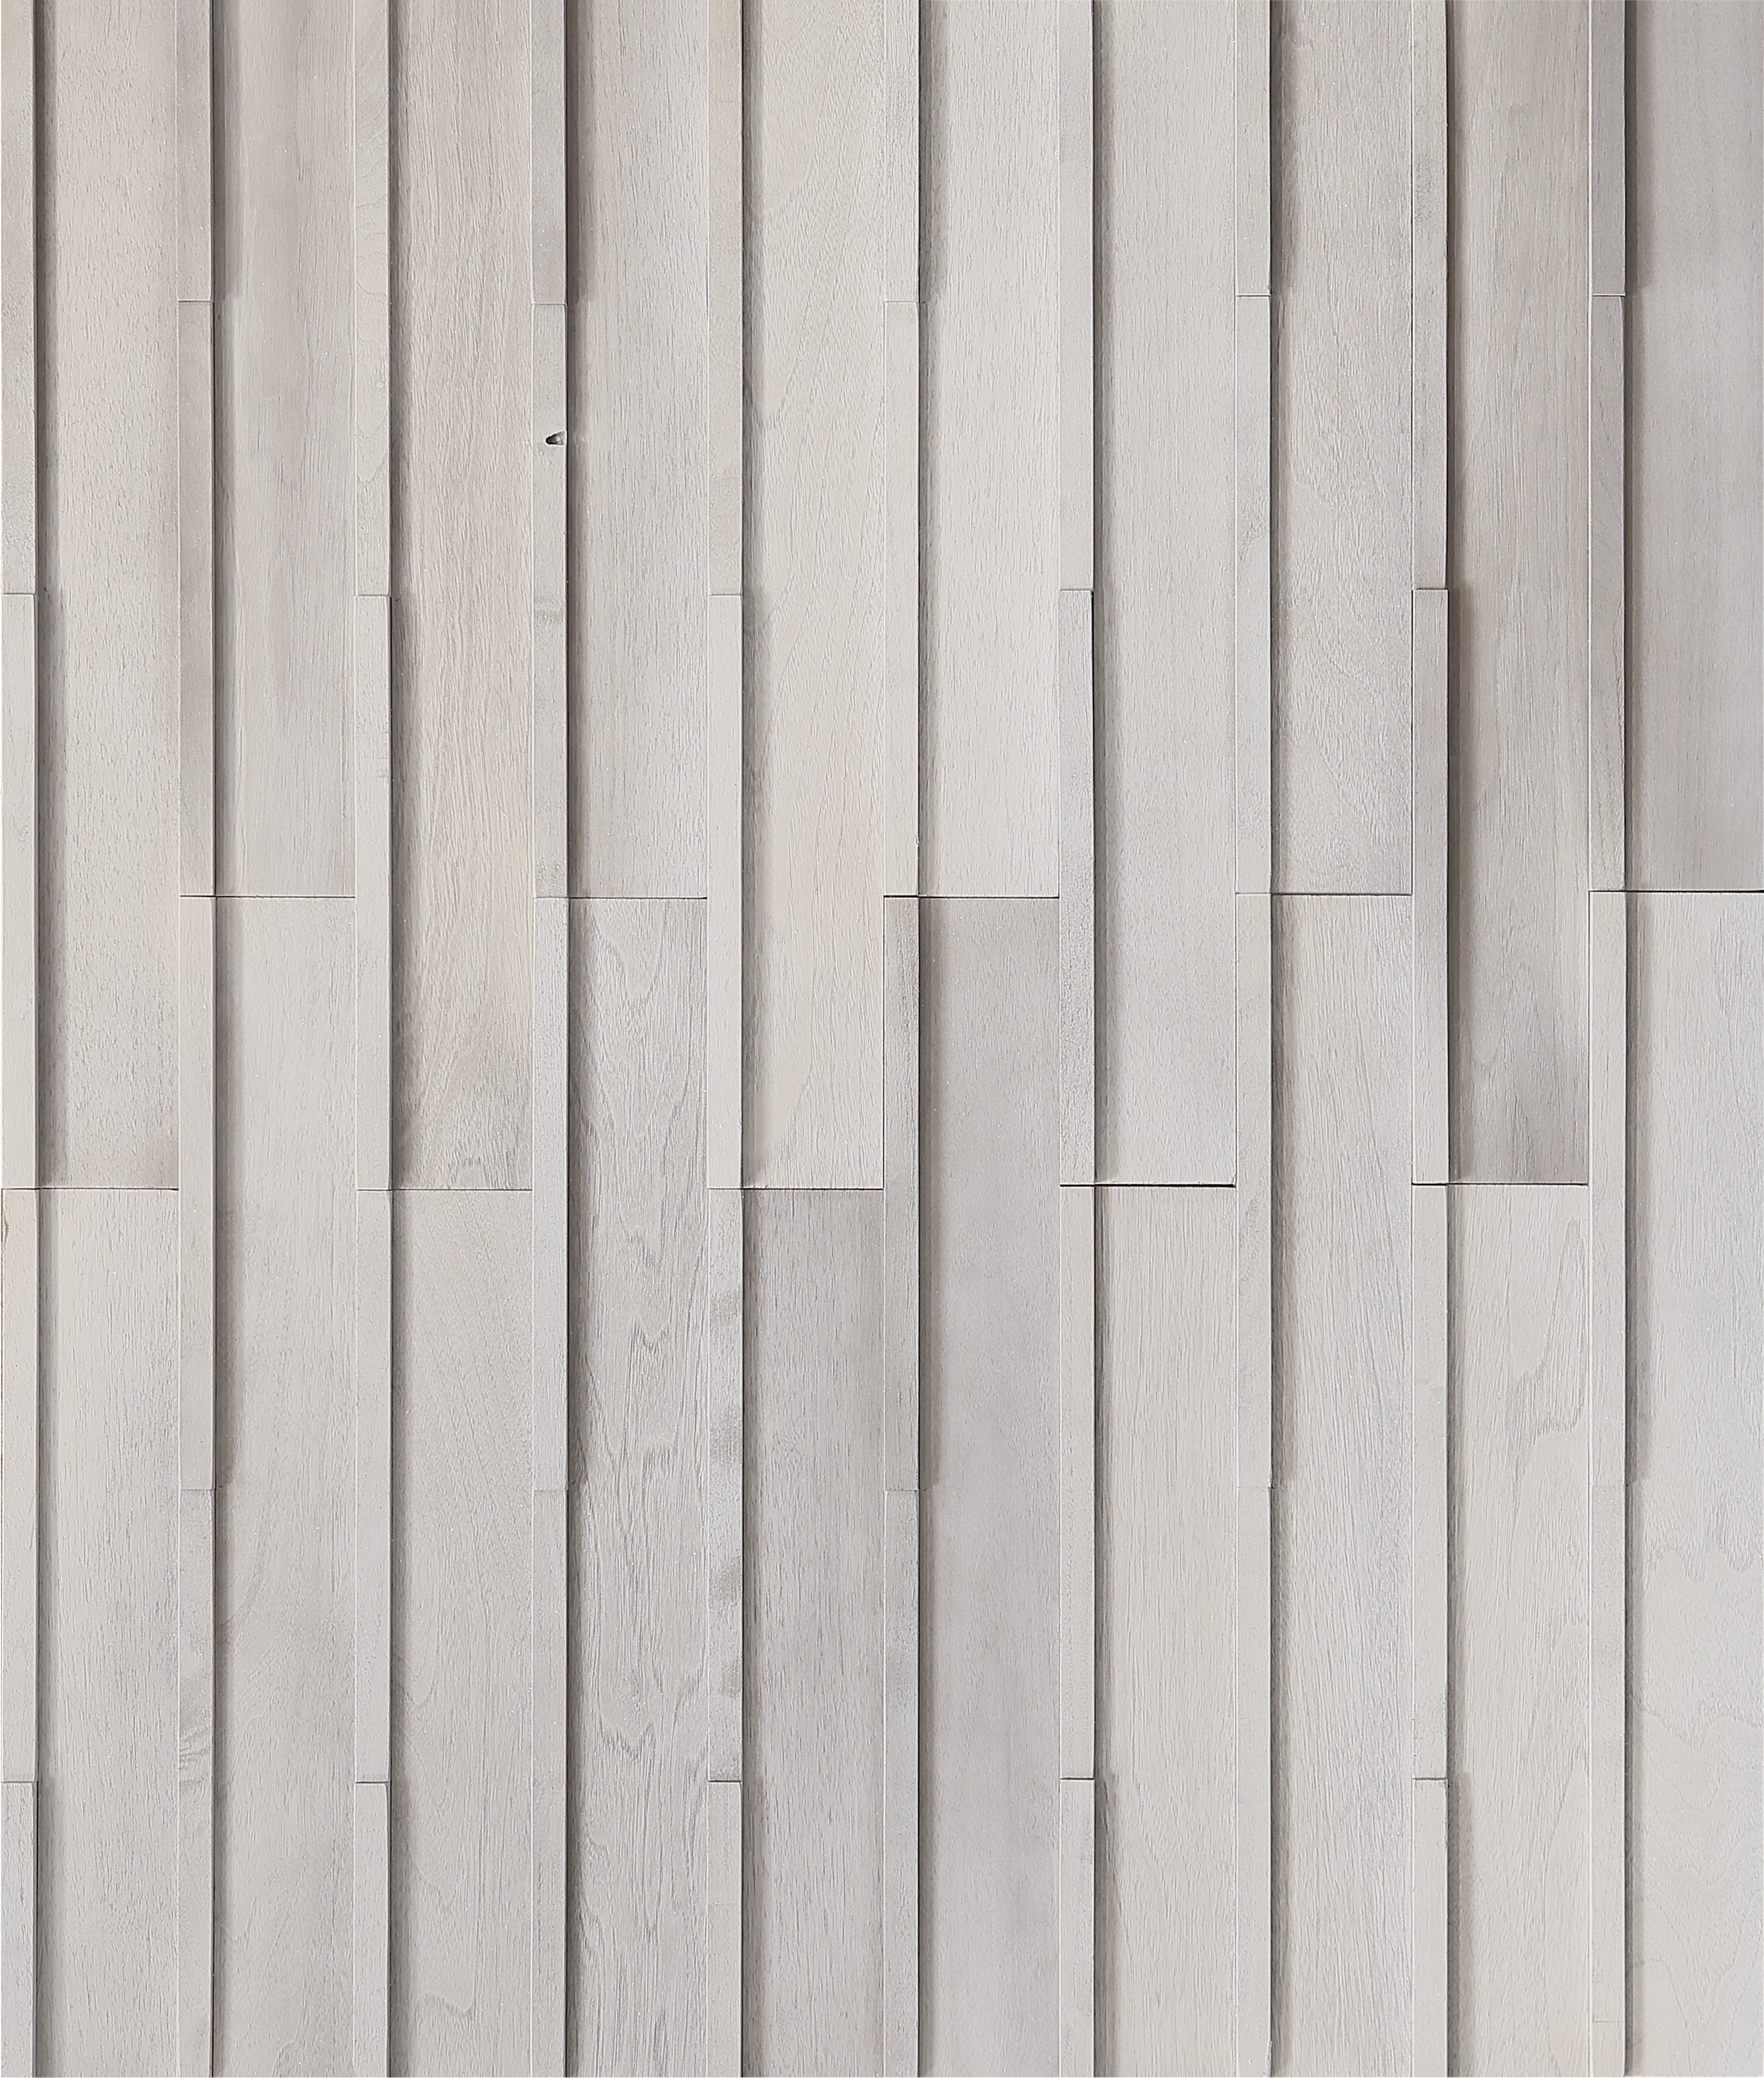 duchateau inceptiv kubik iceberg oak three dimensional wall natural wood panel lacquer for interior use distributed by surface group international